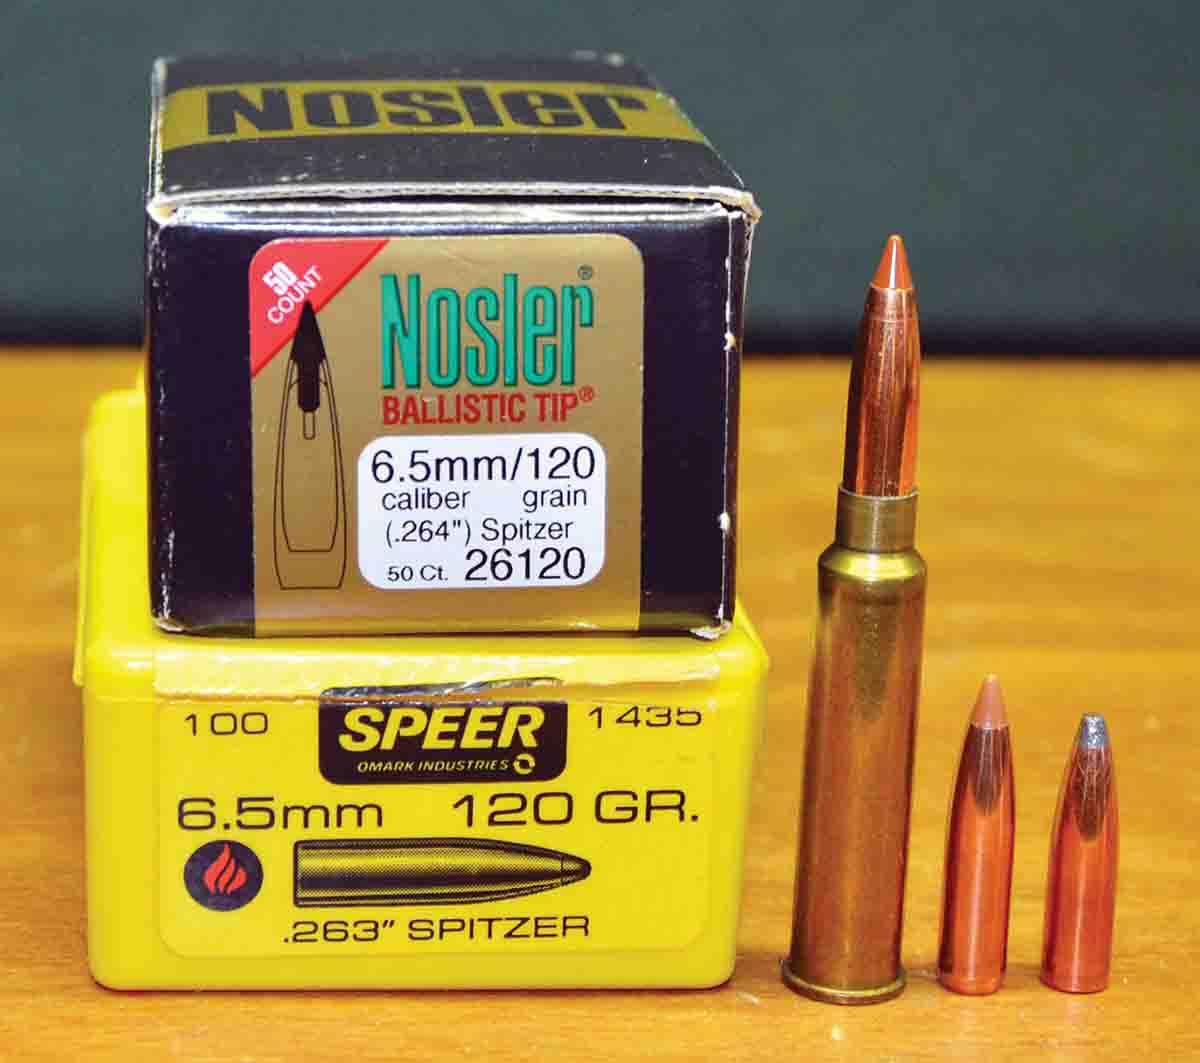 For several decades, the Speer 120- grain spitzer was the most popular bullet among hunters who used SSK Contenders in 6.5 JDJ, but after being discontinued, it was replaced by the Nosler 120-grain Ballistic Tip (left to right): 6.5 JDJ cartridge loaded with a 120-grain Nosler Ballistic Tip, Nosler 120-grain Ballistic Tip and the Speer 120-grain Spitzer.